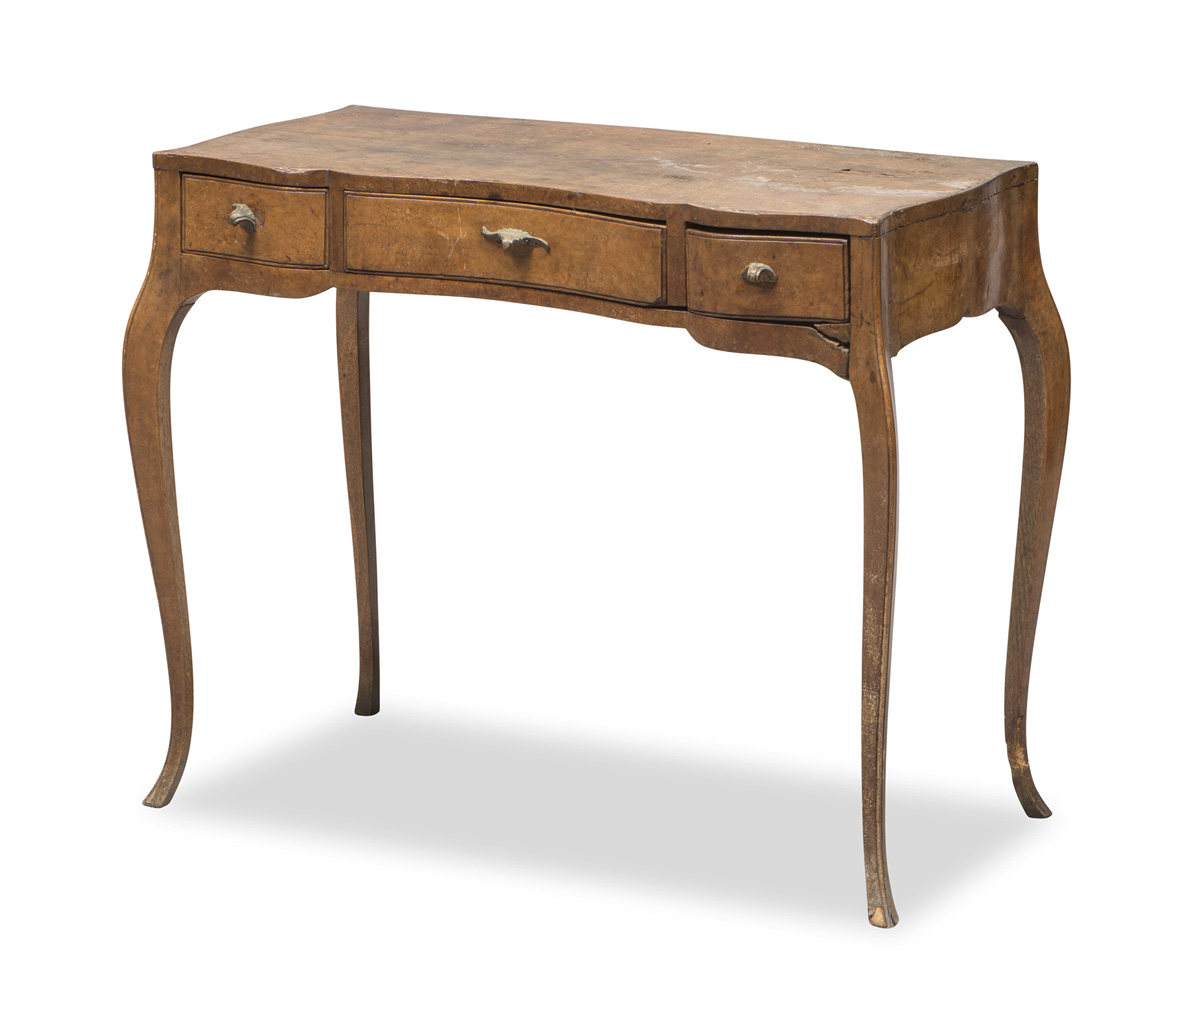 MODEL OF WRITING DESK IN WOOD DYED TO WALNUT LATE 19TH CENTURY